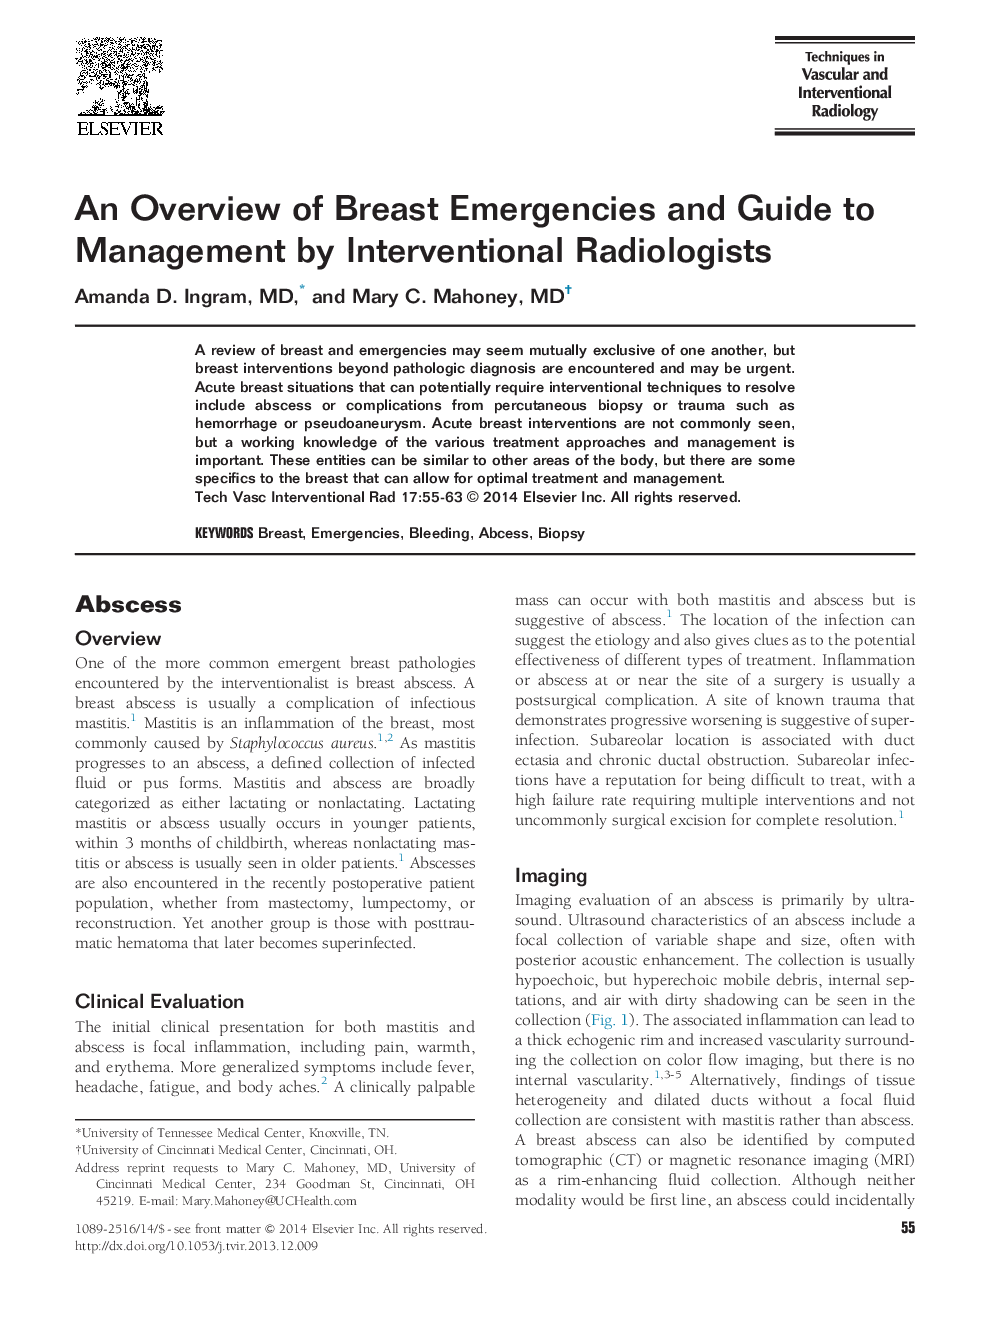 An Overview of Breast Emergencies and Guide to Management by Interventional Radiologists